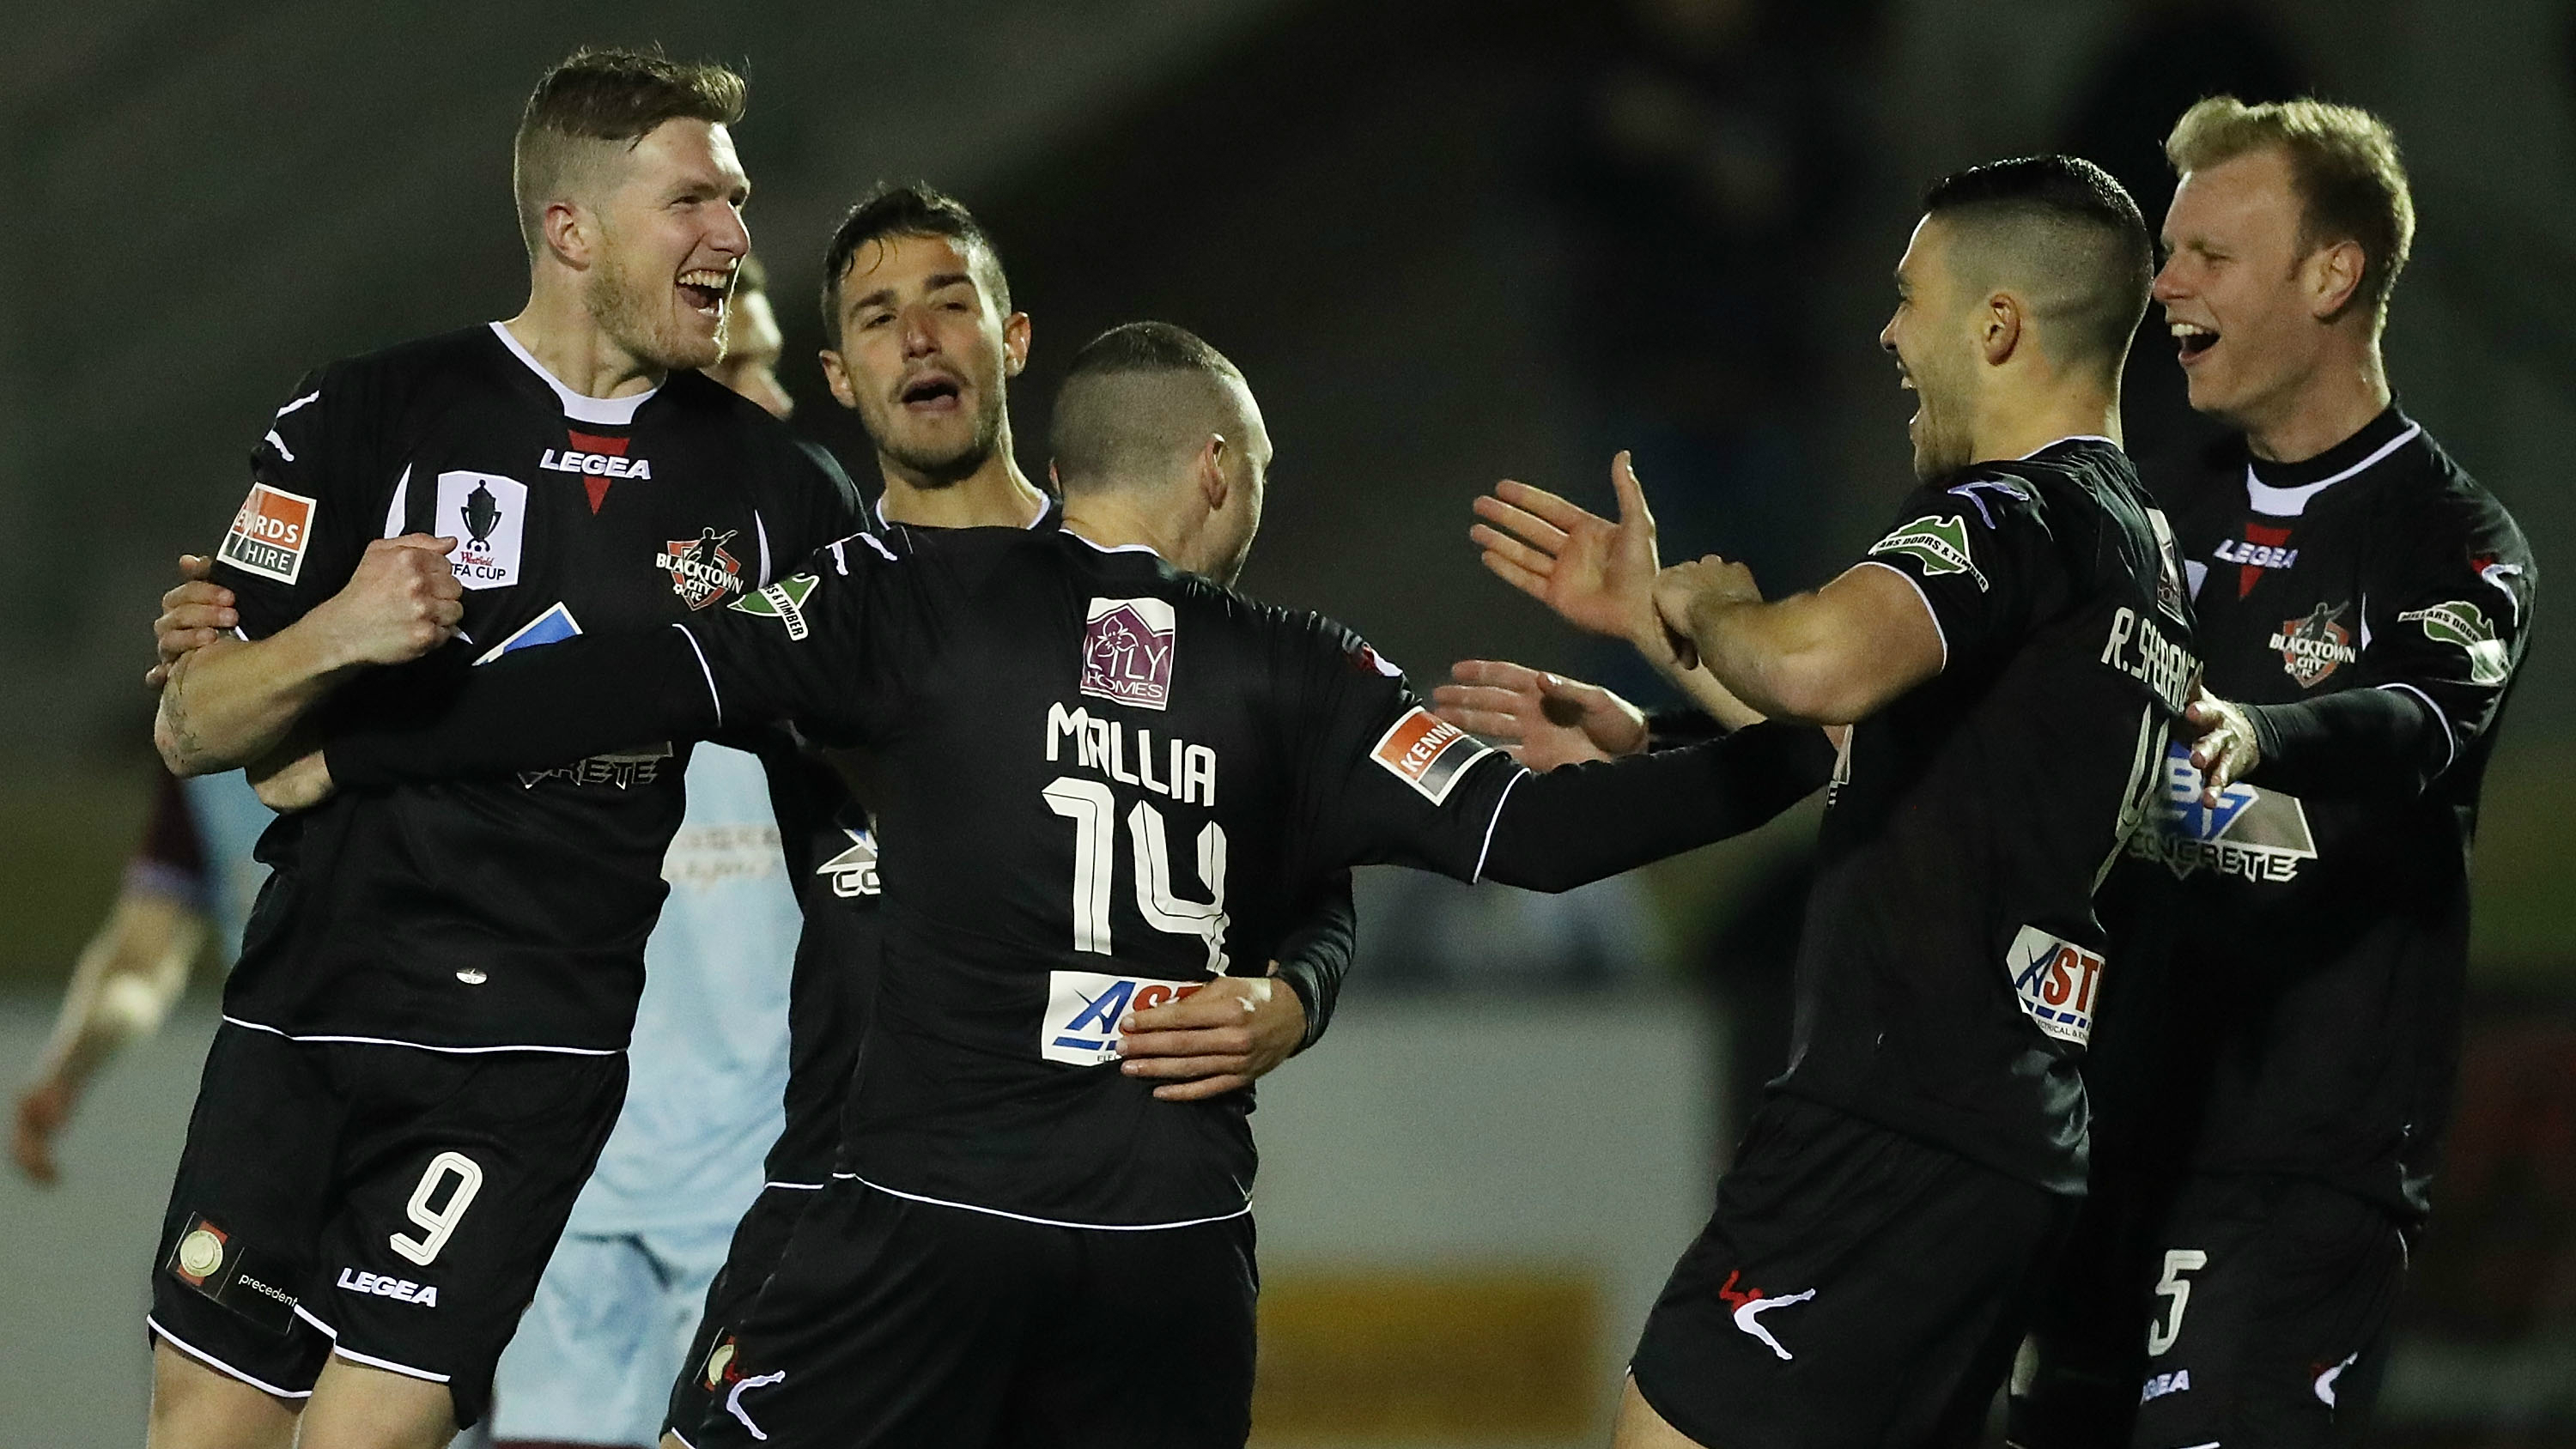 blacktown-city-players-celebrate-a-goal-in-their-westfield-ffa-cup-rd-of-16-win-over-apia-leichhardt_1uy6axey7b83d1bo74zppe2owx.jpg